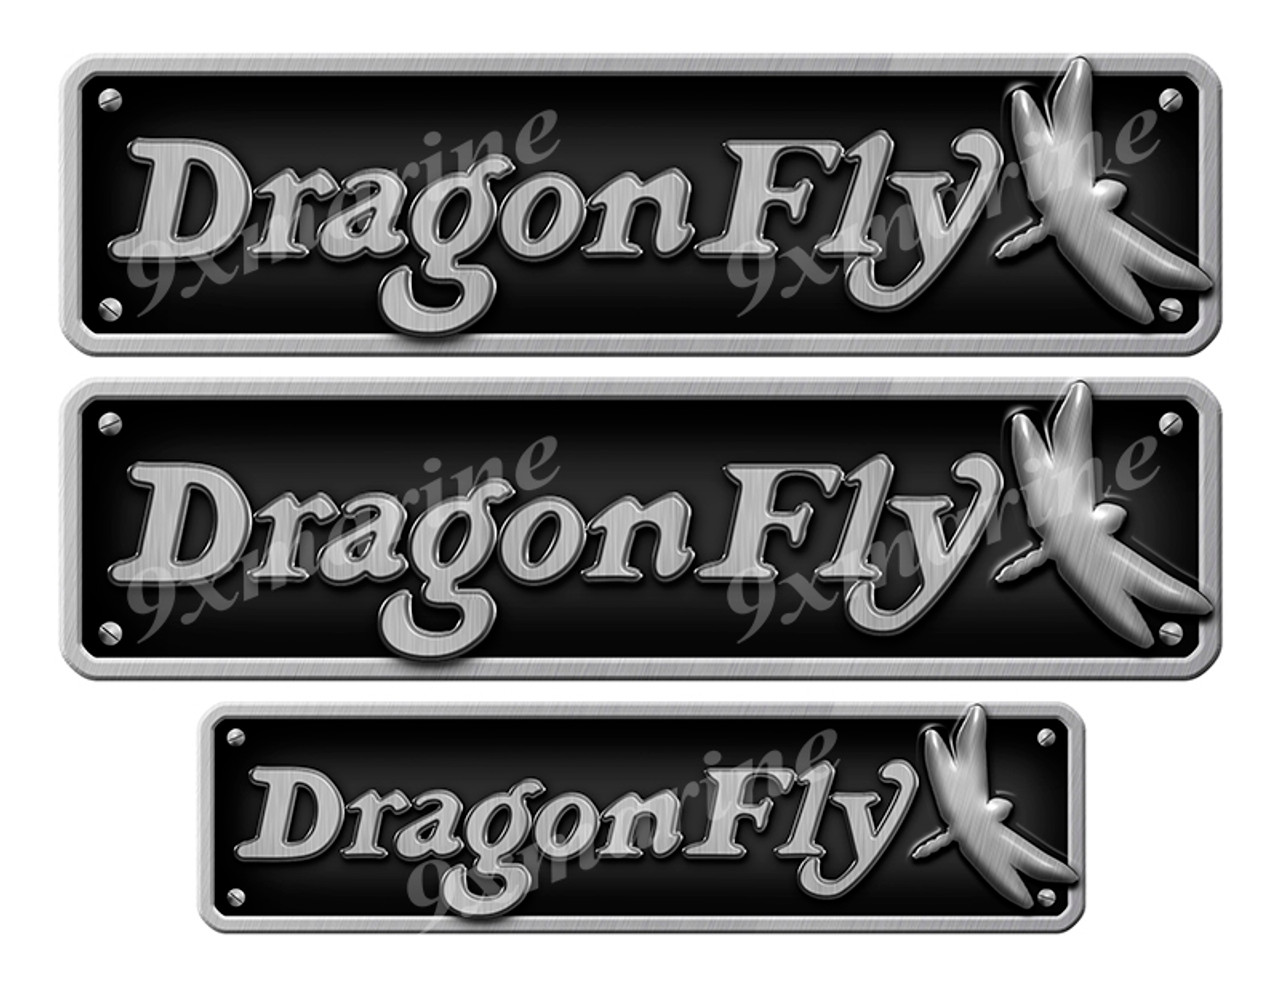 DragonFly Yacht Imitation Name Plate Sticker set. 10" and 7.5" long 